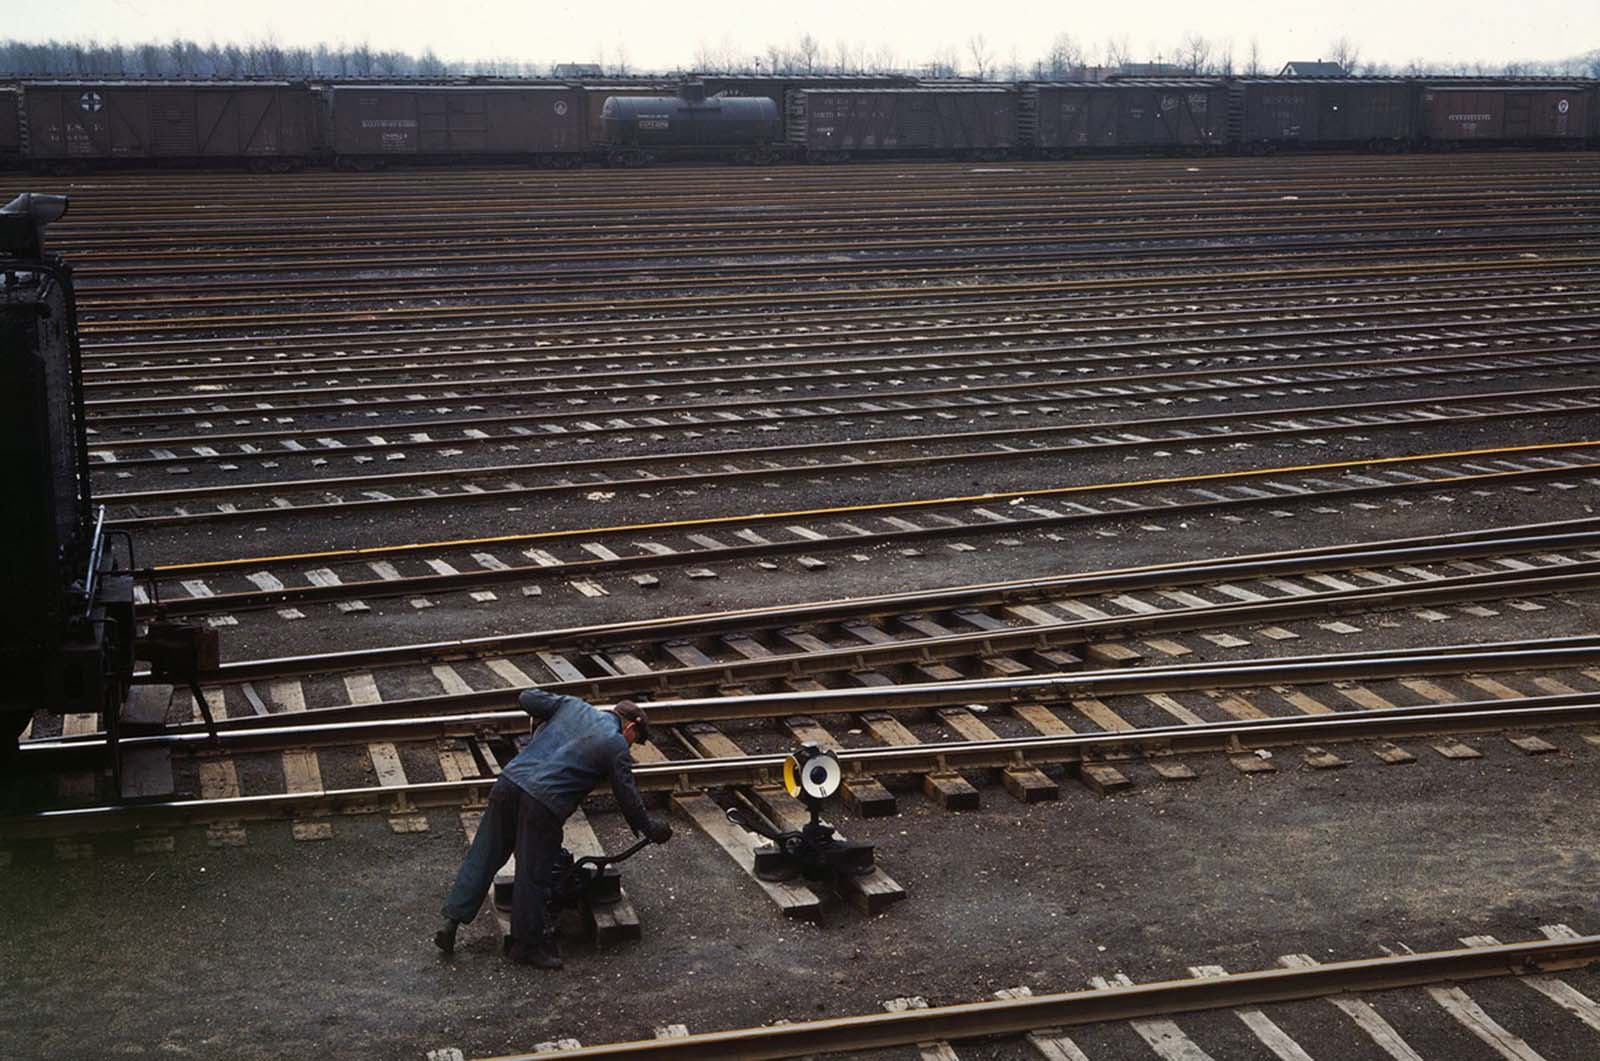 A switchman throwing a switch at Chicago and North Western Railroad’s Proviso yard in April 1943.